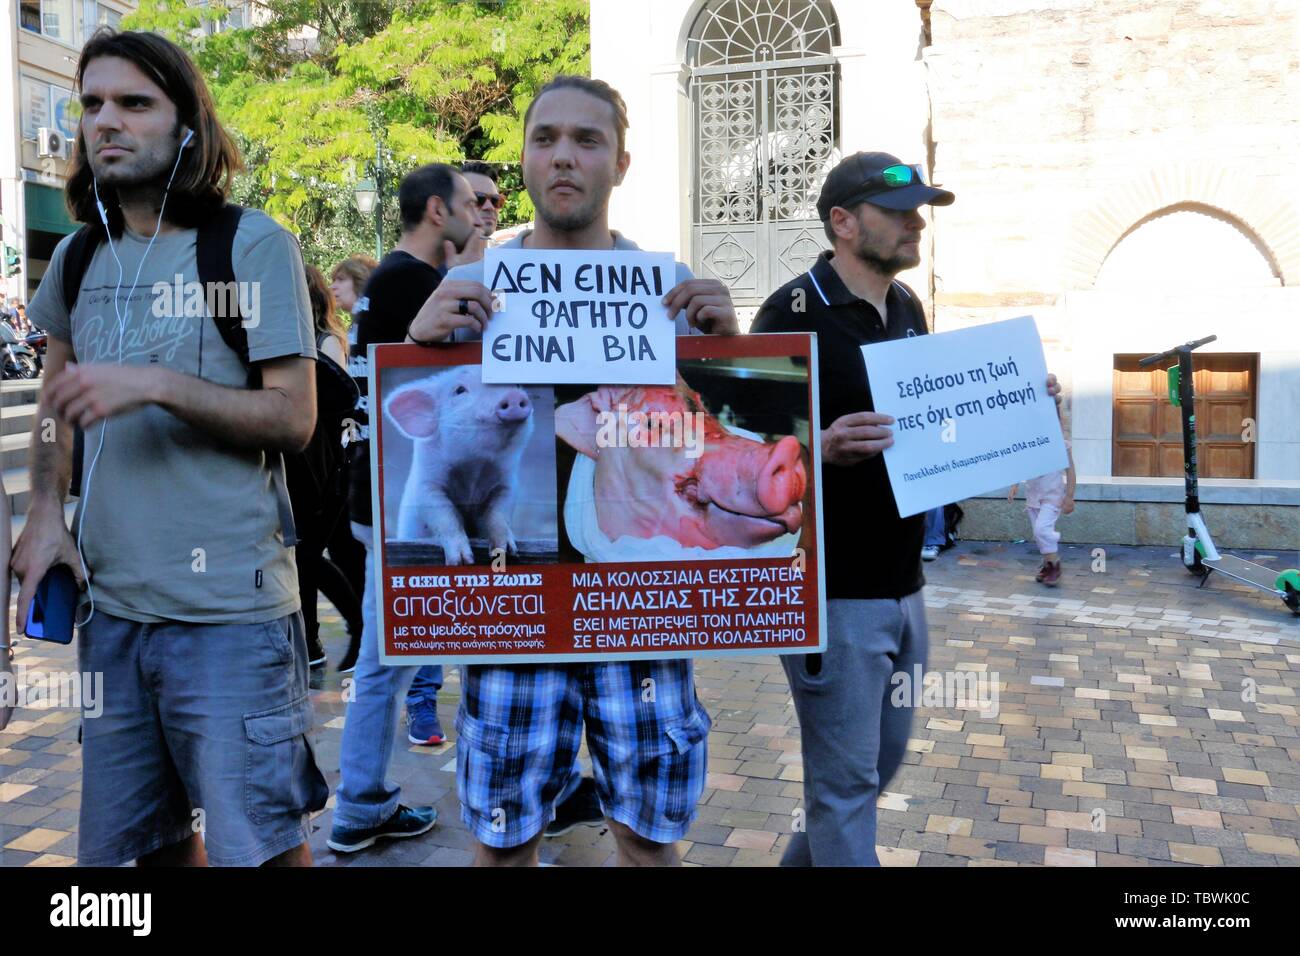 A protester holds a placard showing the tragic end of a piglet with a slogan it's not food, its violence during the protest at monastiraki square. Vegan activists demonstrate in front of the Monastiraki square in Athens, promoting the vegan way of life and demonstrating against meat consumption. Stock Photo